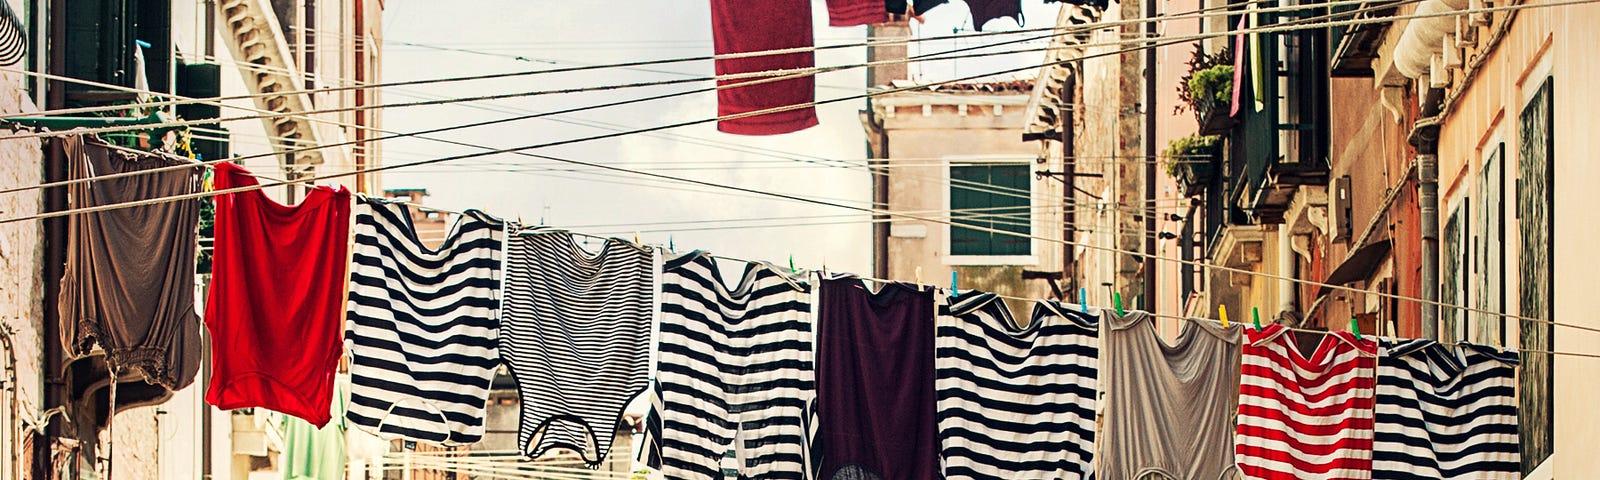 the space between two apartments with several laundry lines zigzagging. shirts are hanging on three of the lines against a pale blue sky